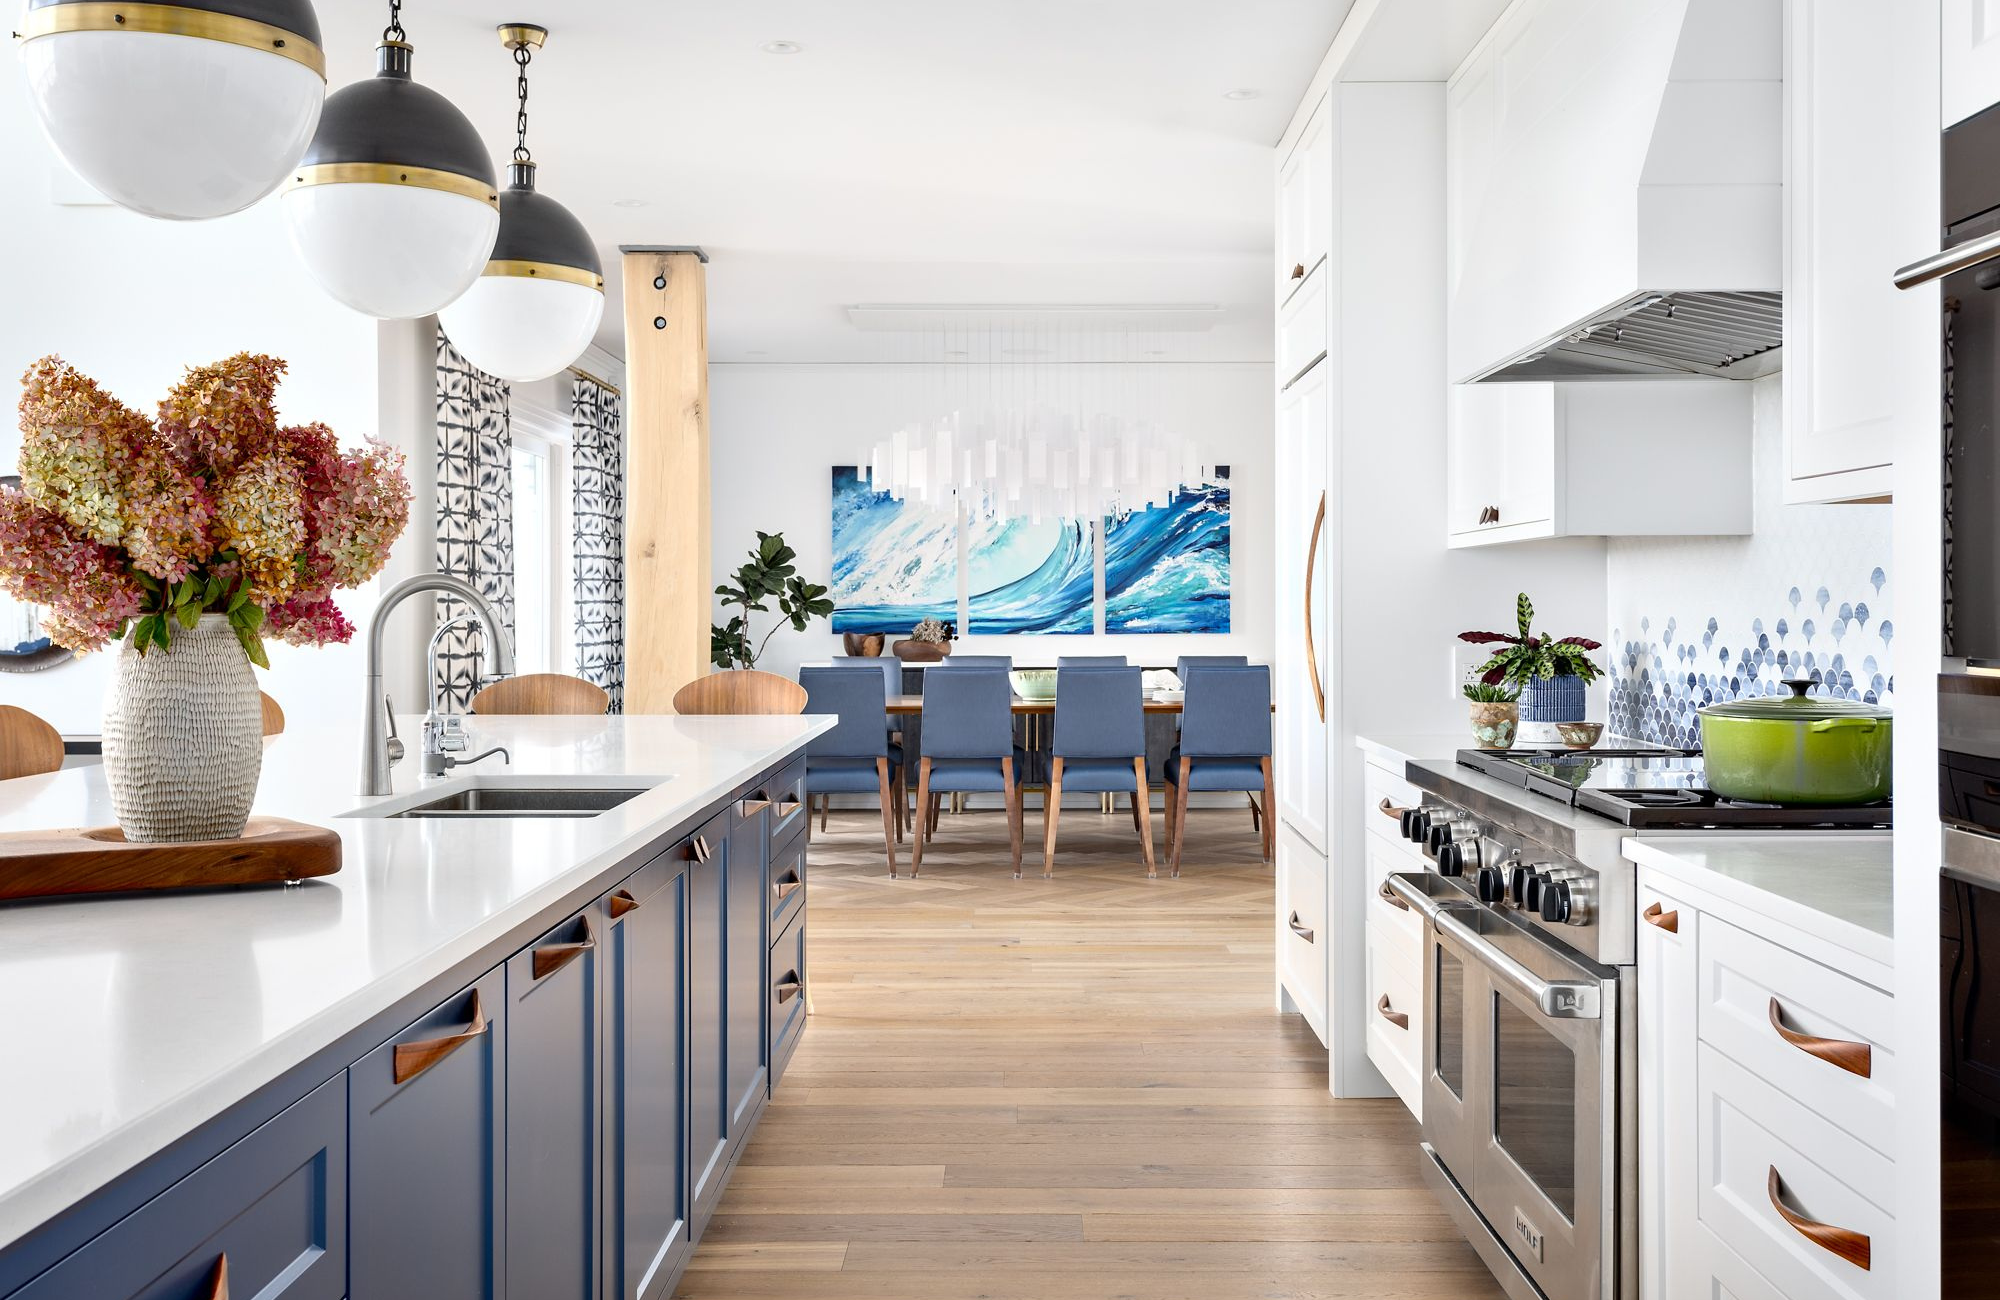 simply-home-decorating-springbrook-home-design-east-coast-meets-west-coast-contemporary-open-concept-kitchen-dining-room-white-navy-blue